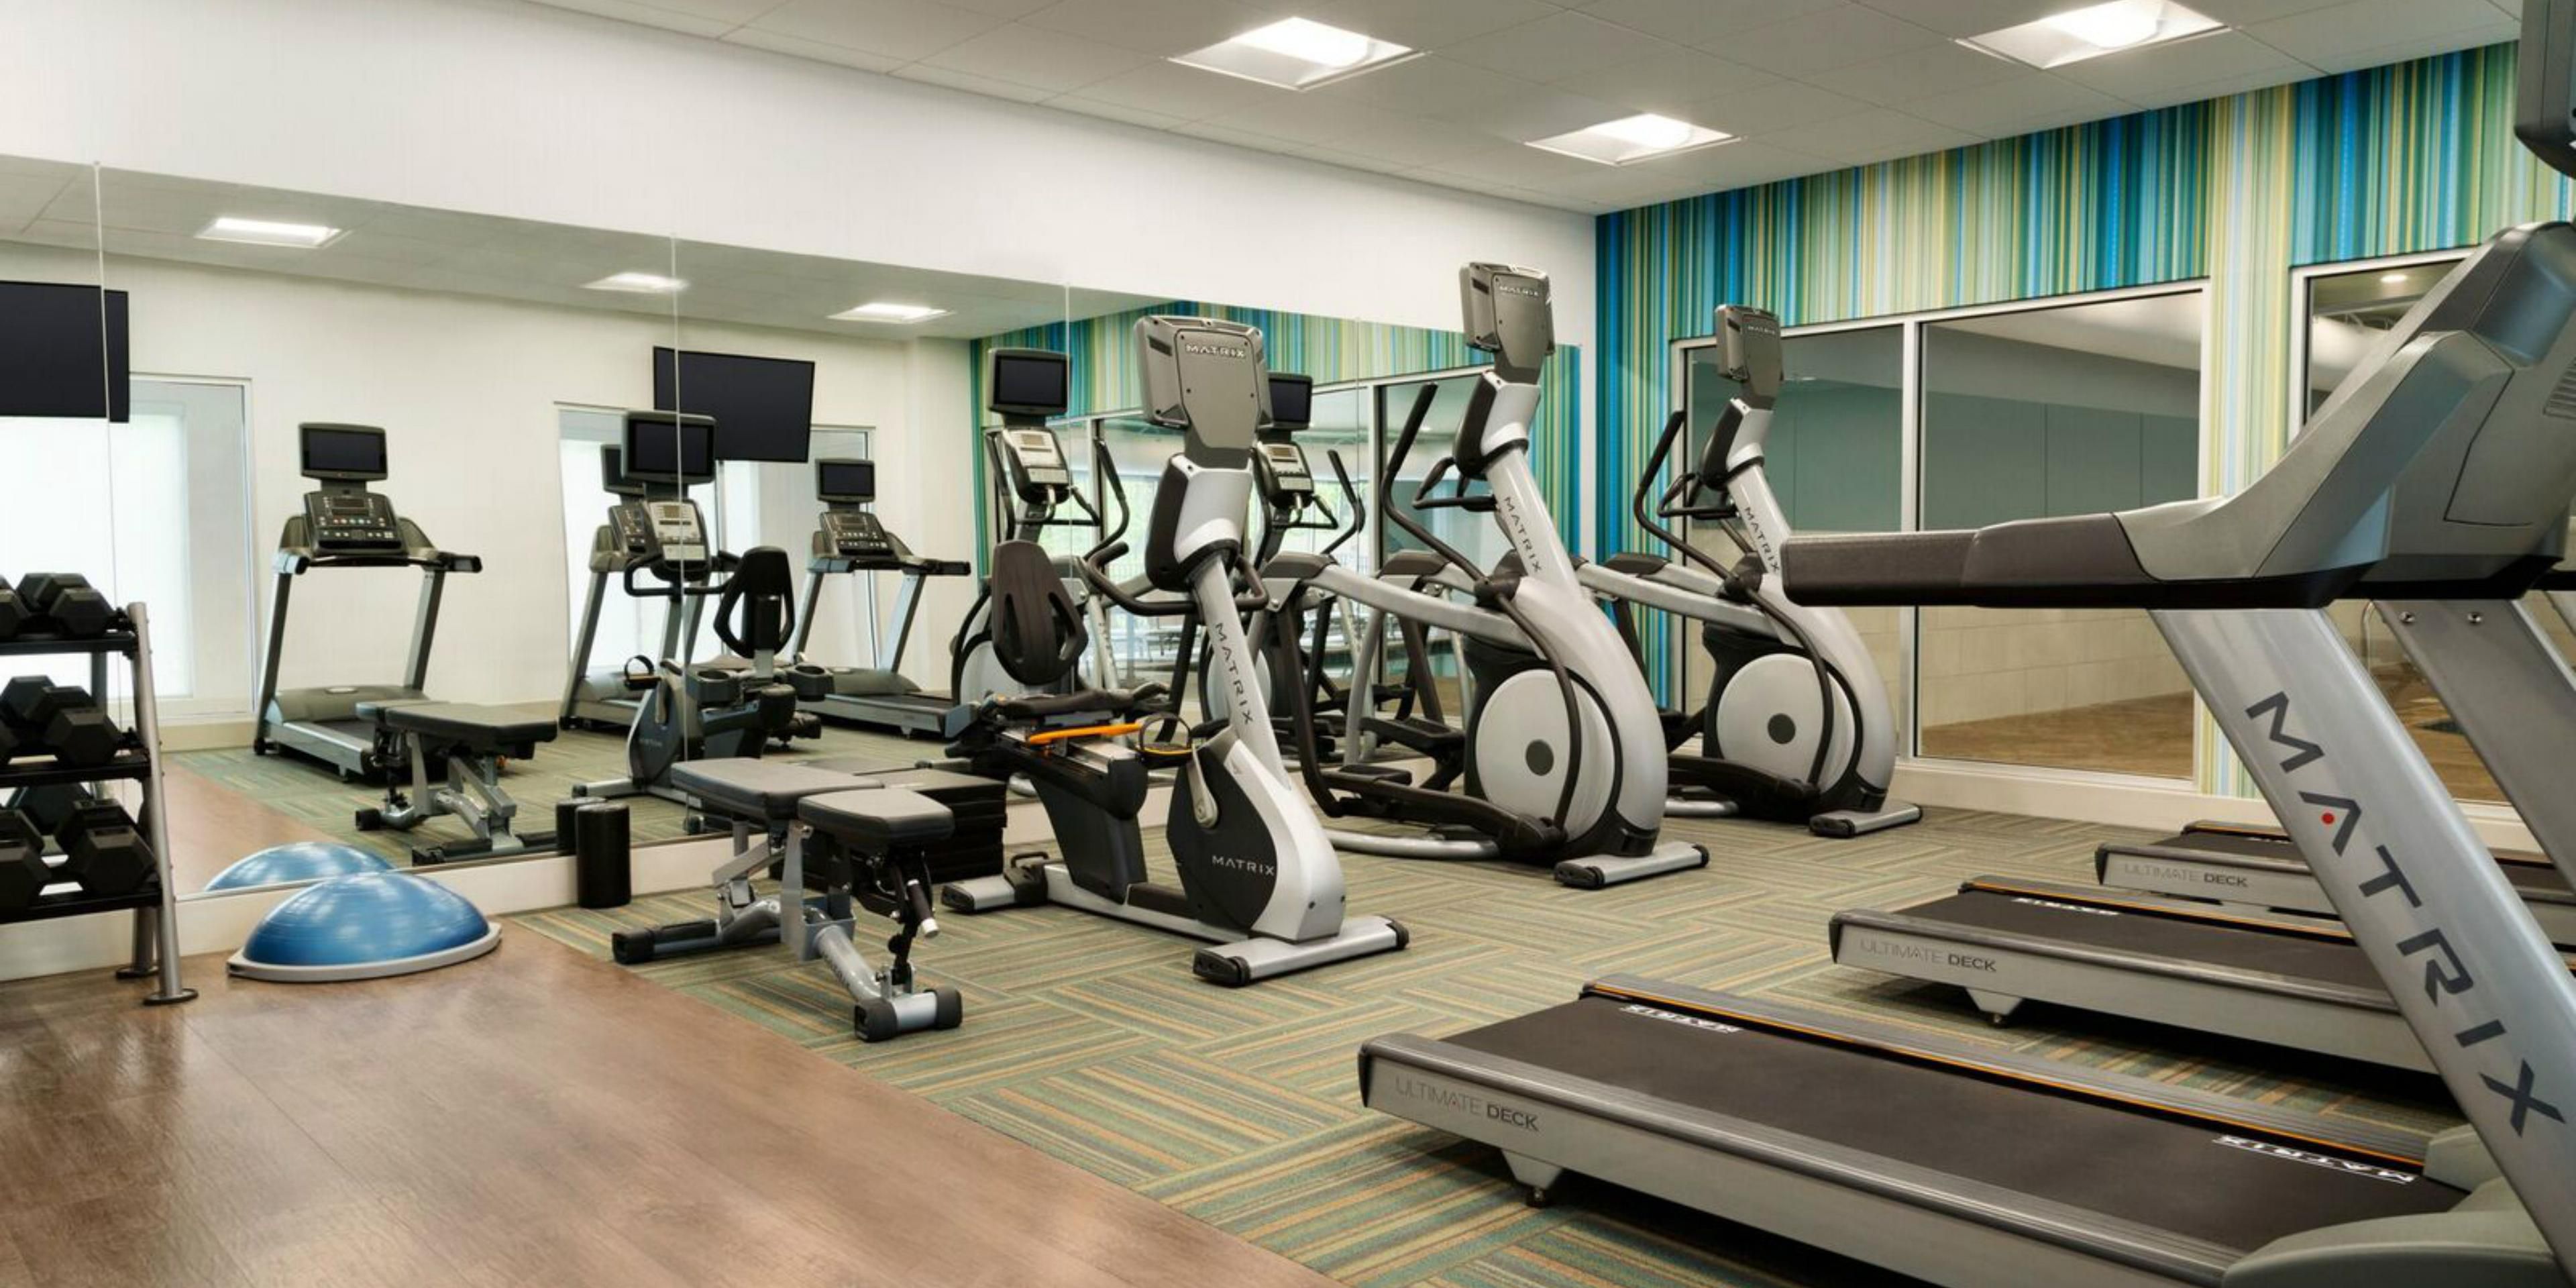 Our well-equipped Fitness Center allows you to stay on track with your fitness routine while traveling.